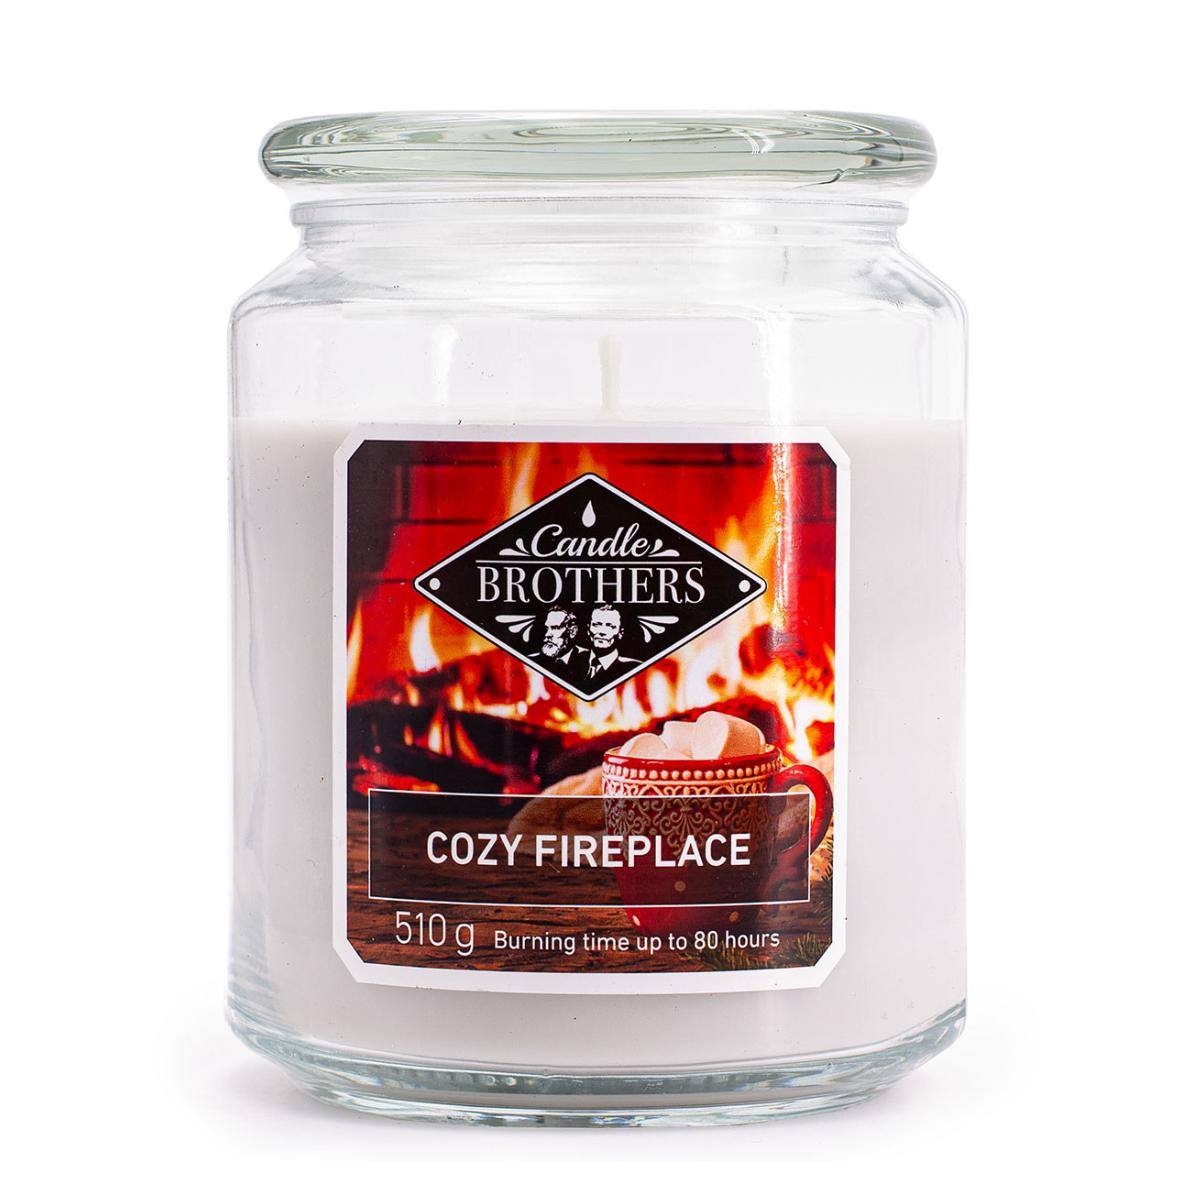 Cozy Fireplace - Duftkerze 510g von Candle Brothers